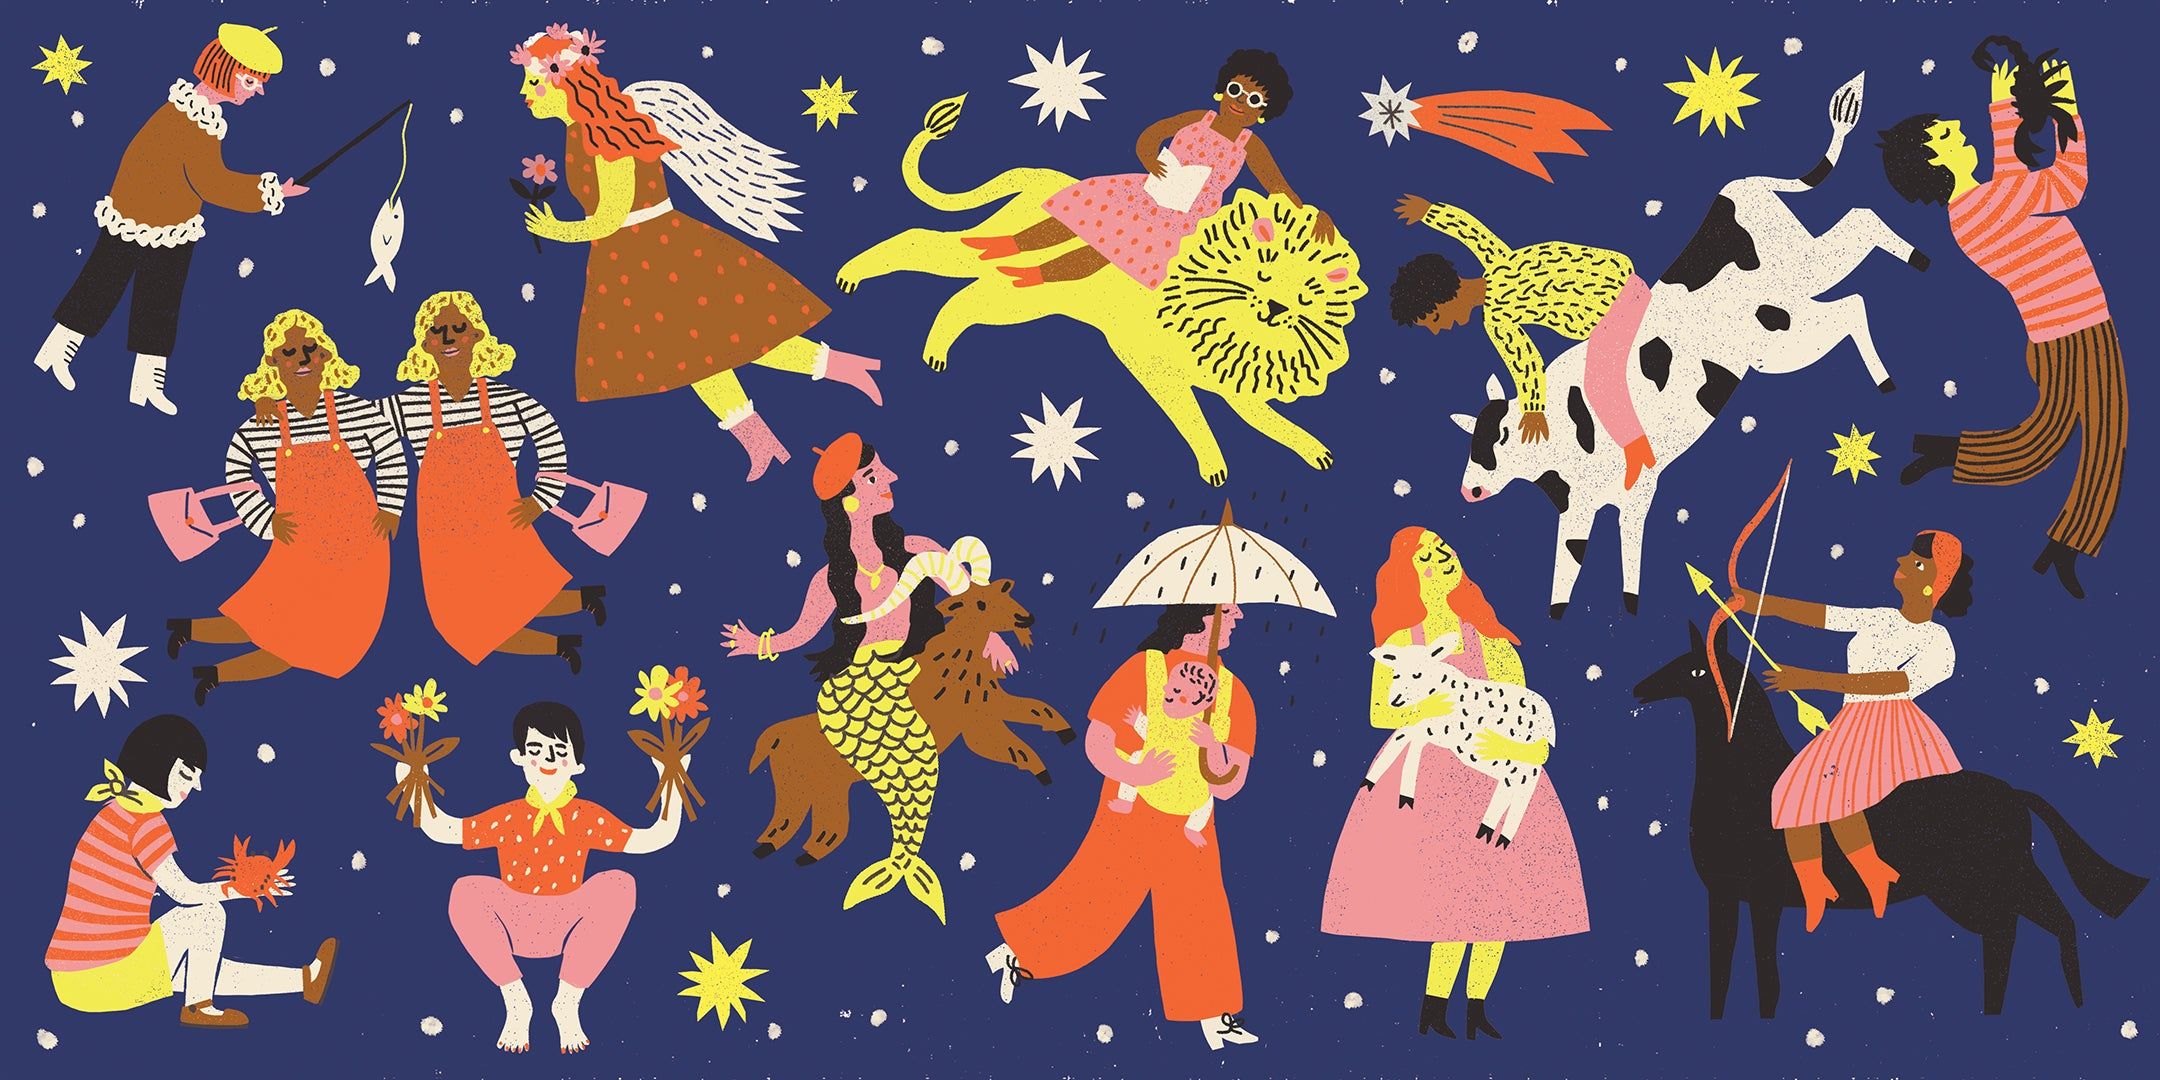 celebration of 2022 horoscopes with each zodiac sign depicted as a person with an animal 